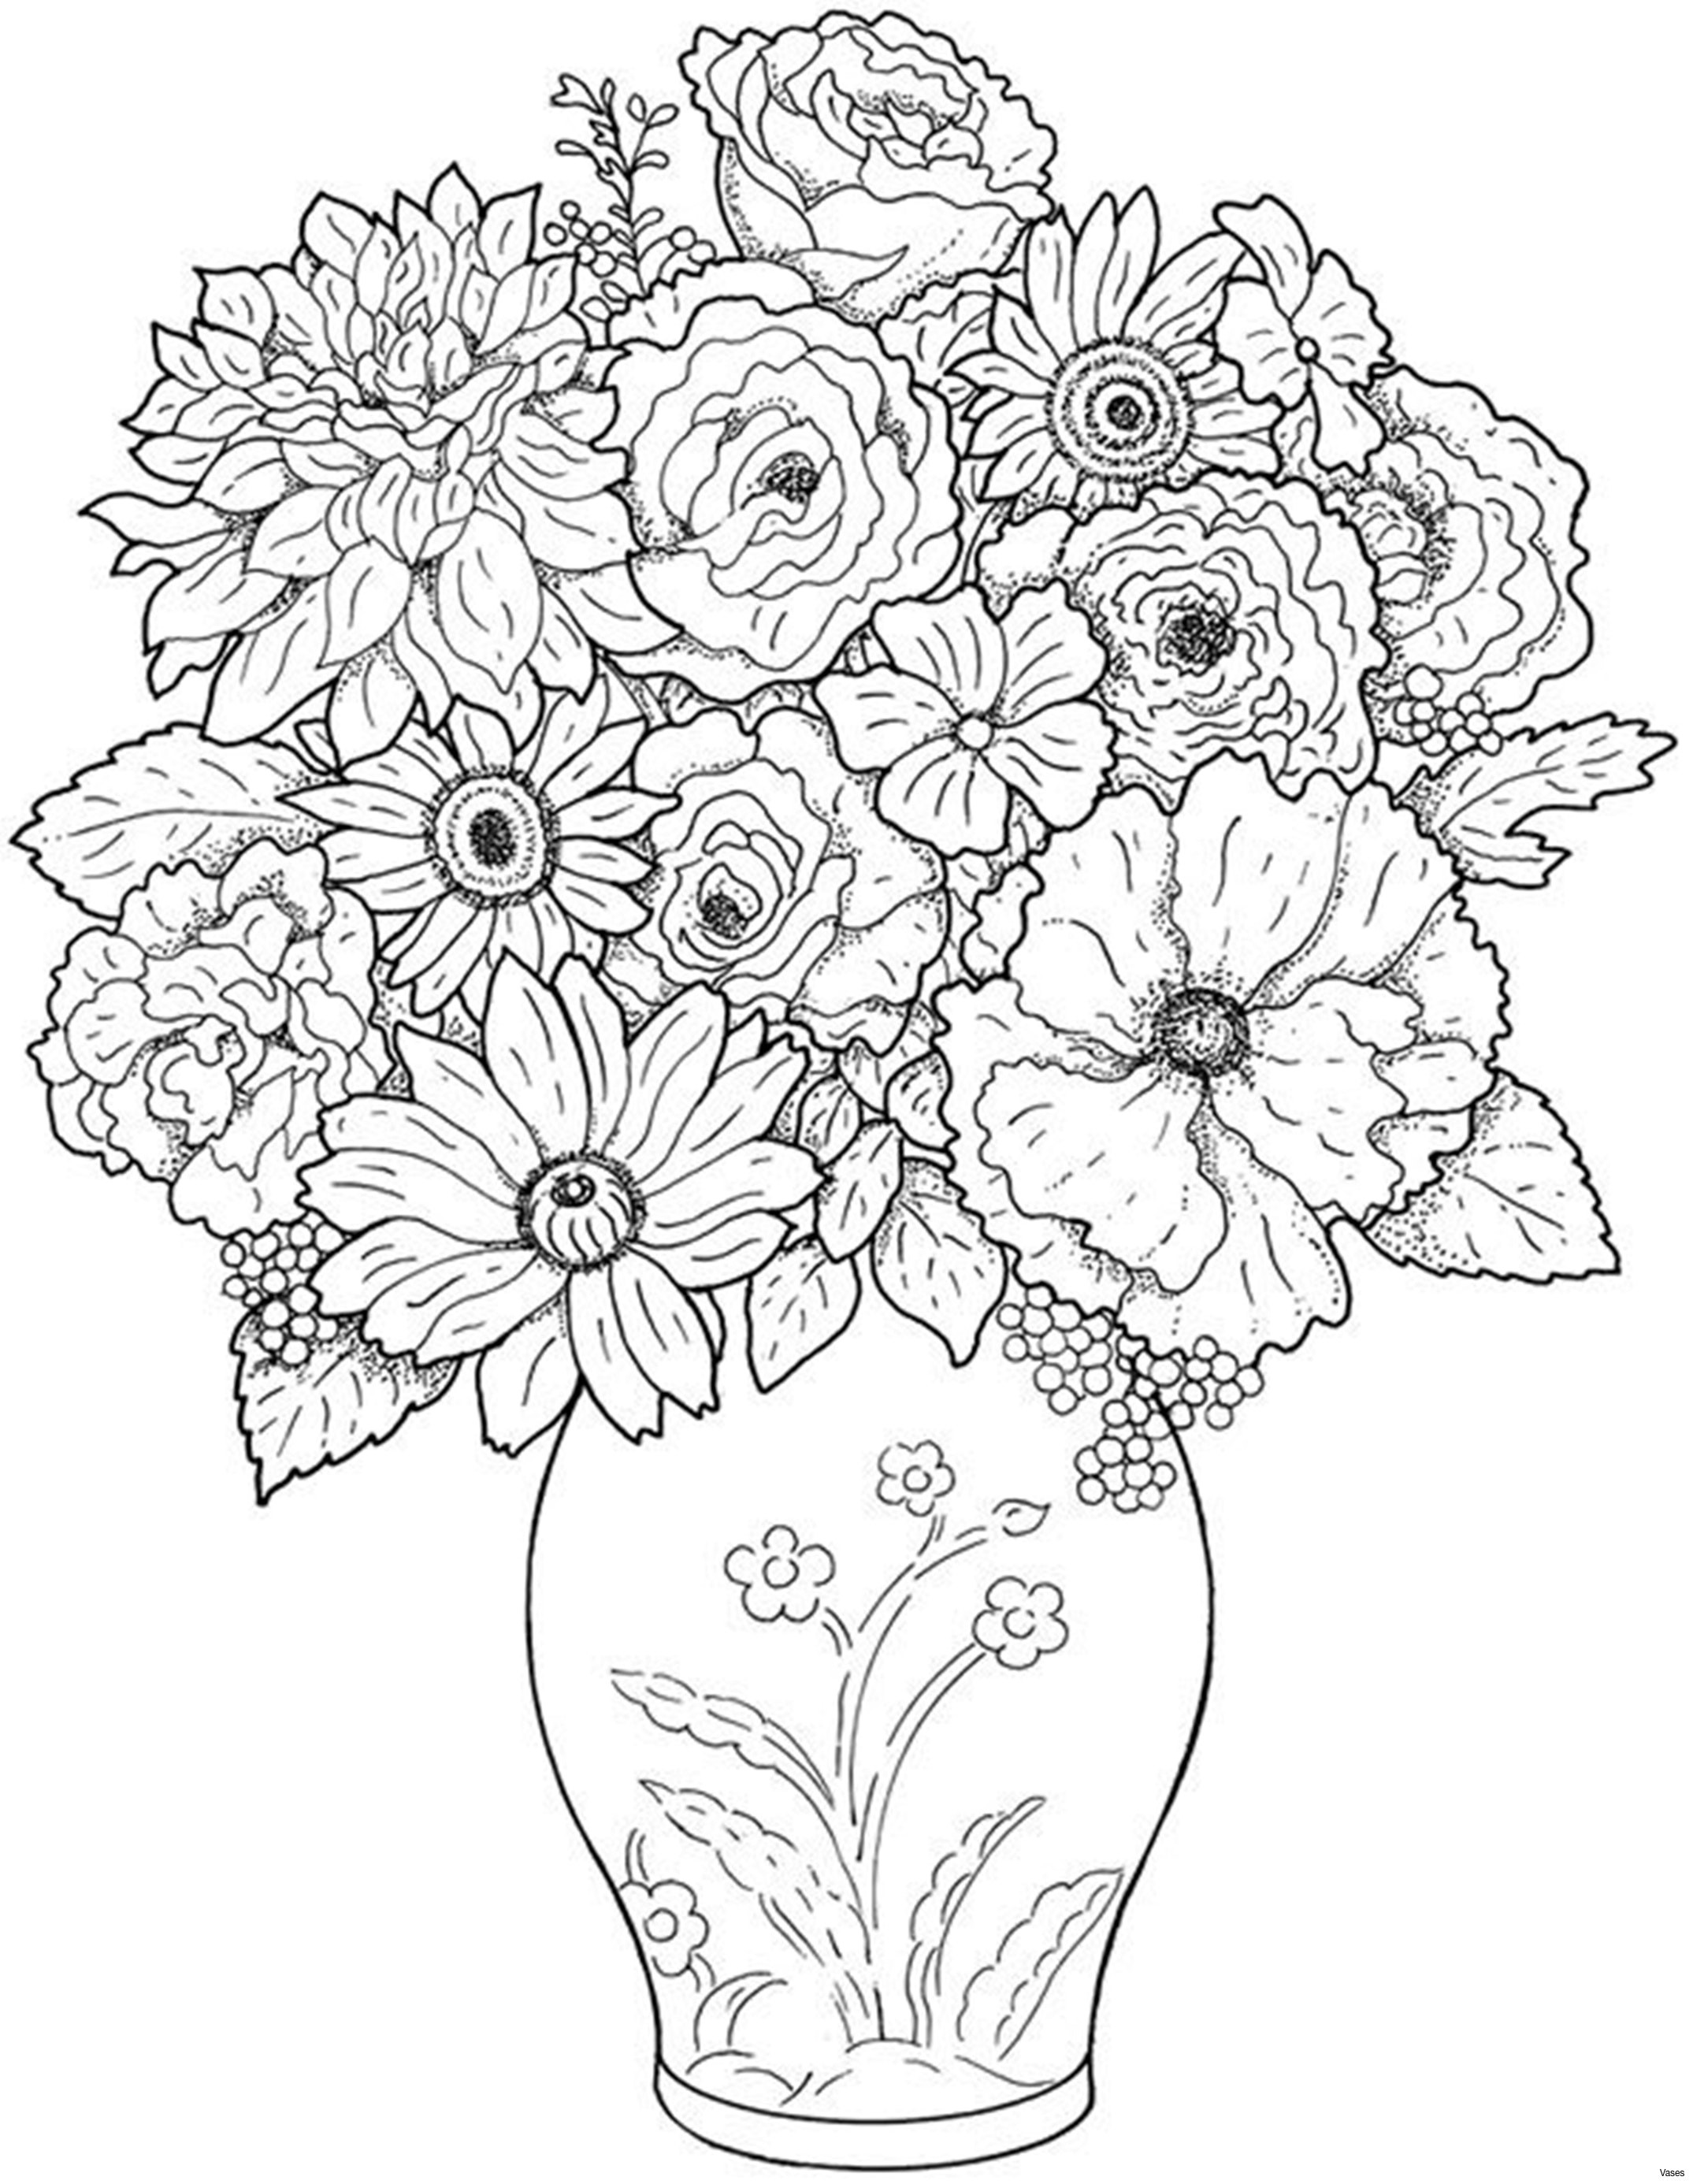 14 Stylish Flower Vase From Beauty and the Beast 2024 free download flower vase from beauty and the beast of free beauty and the beast coloring pages free coloring sheets in rose coloring pages fun time of free beauty and the beast coloring pages